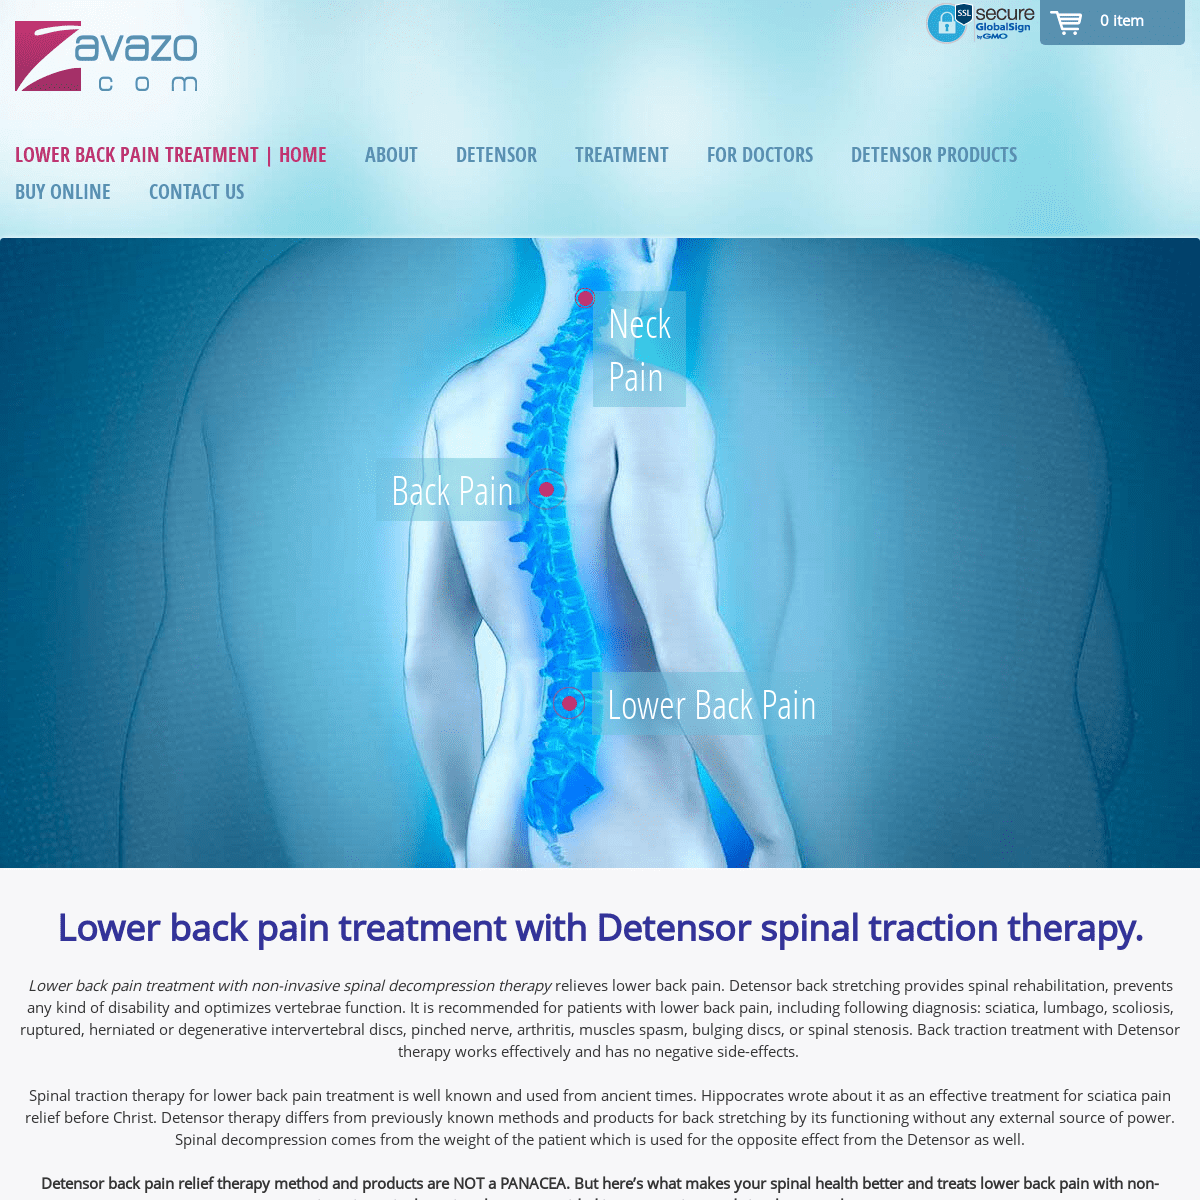 Lower Back Pain Treatment | Spinal Decompression | Therapy